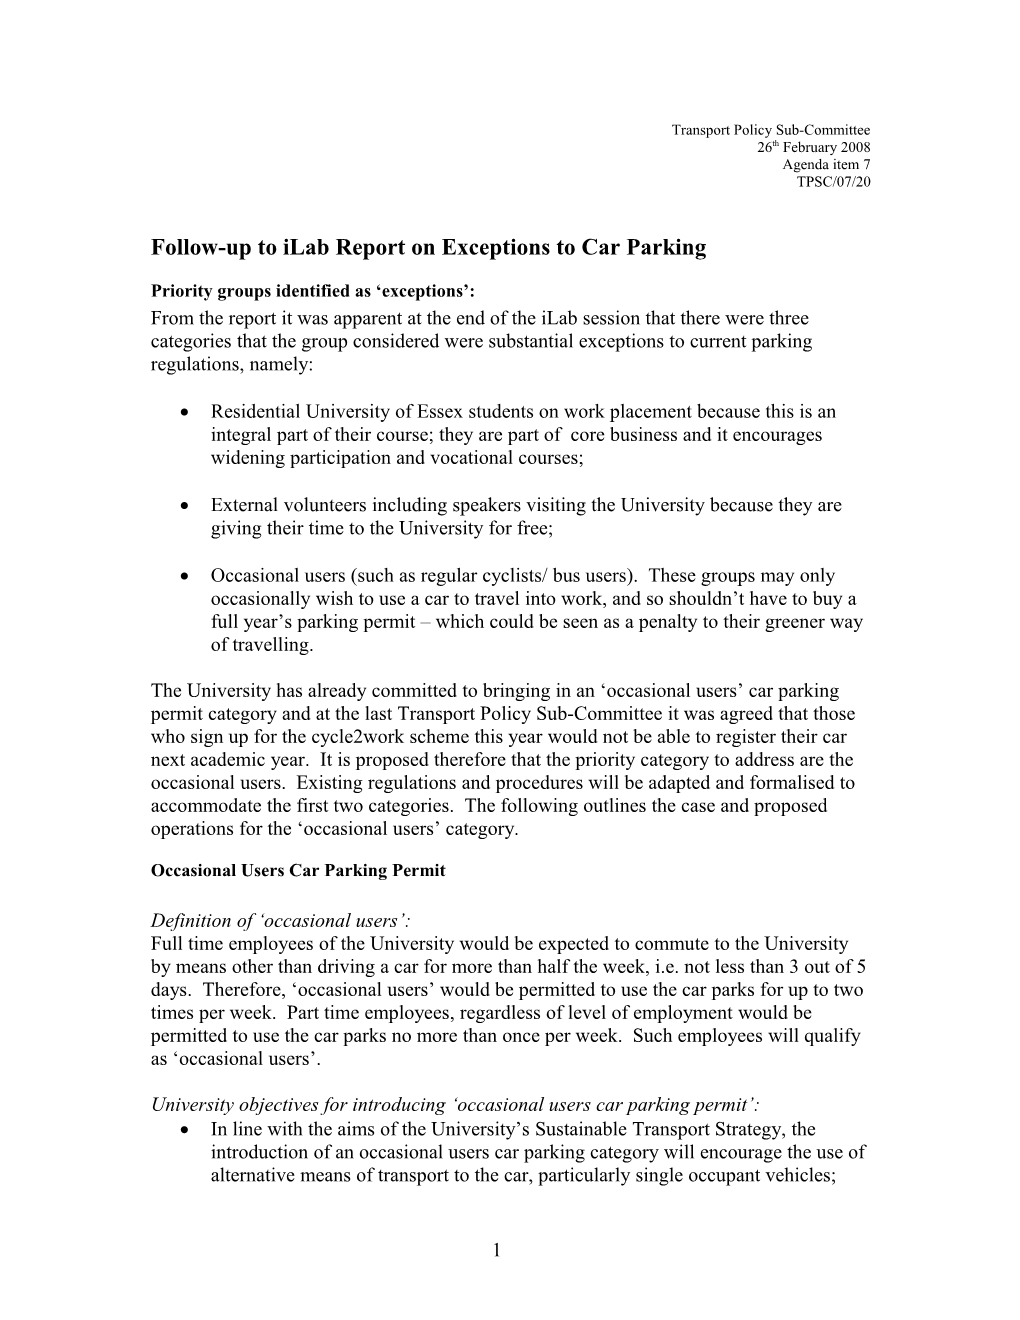 Follow up to Ilab Report on Exceptions to Car Parking